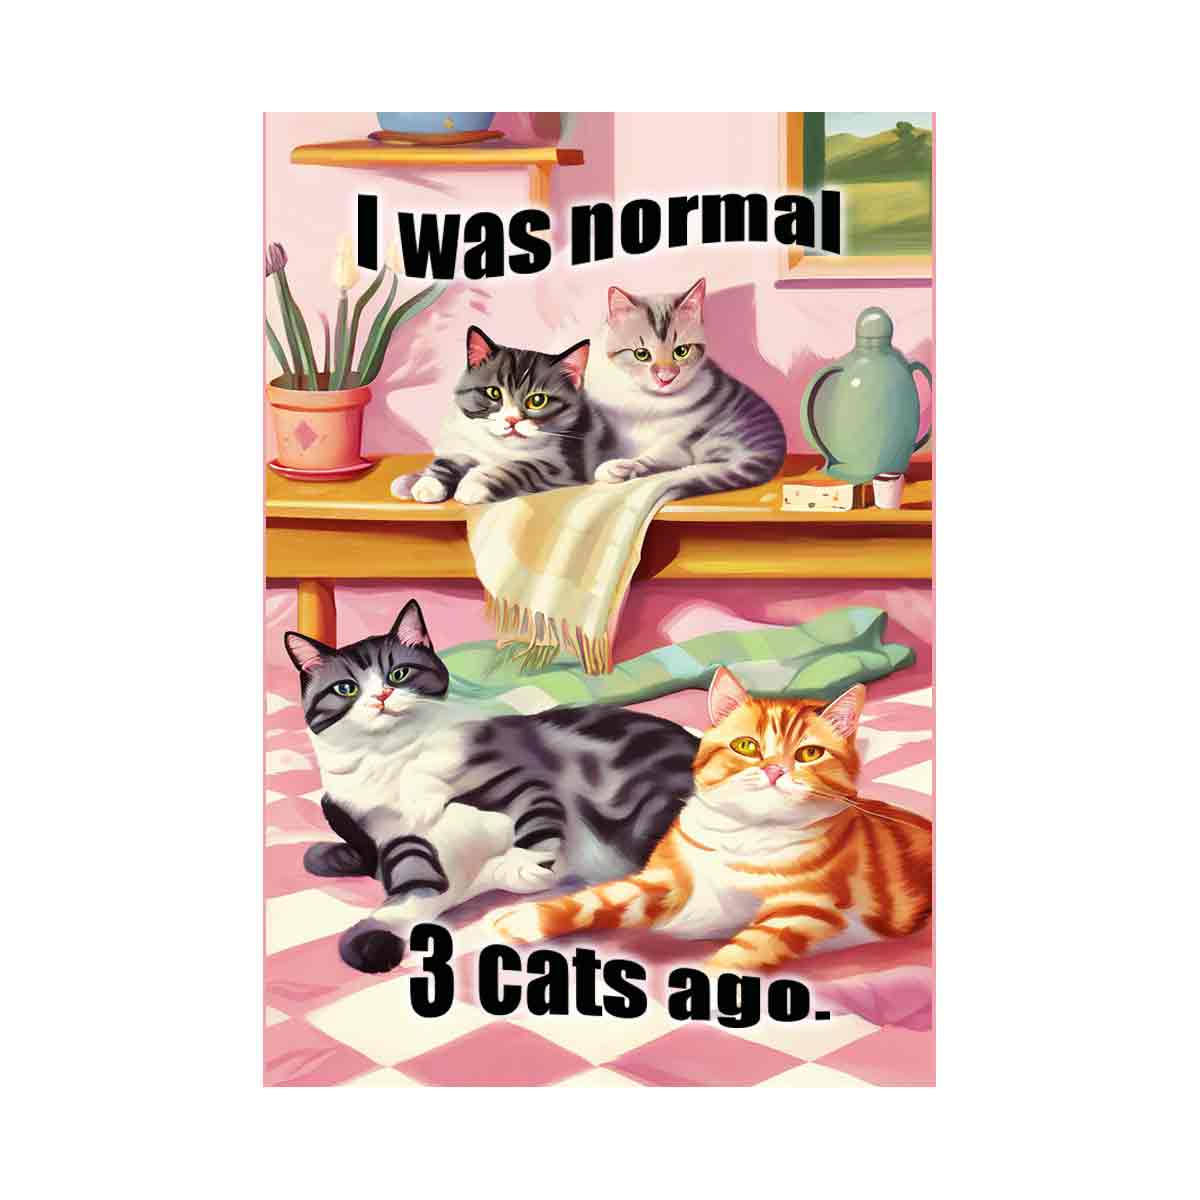 I was normal 3 cats ago